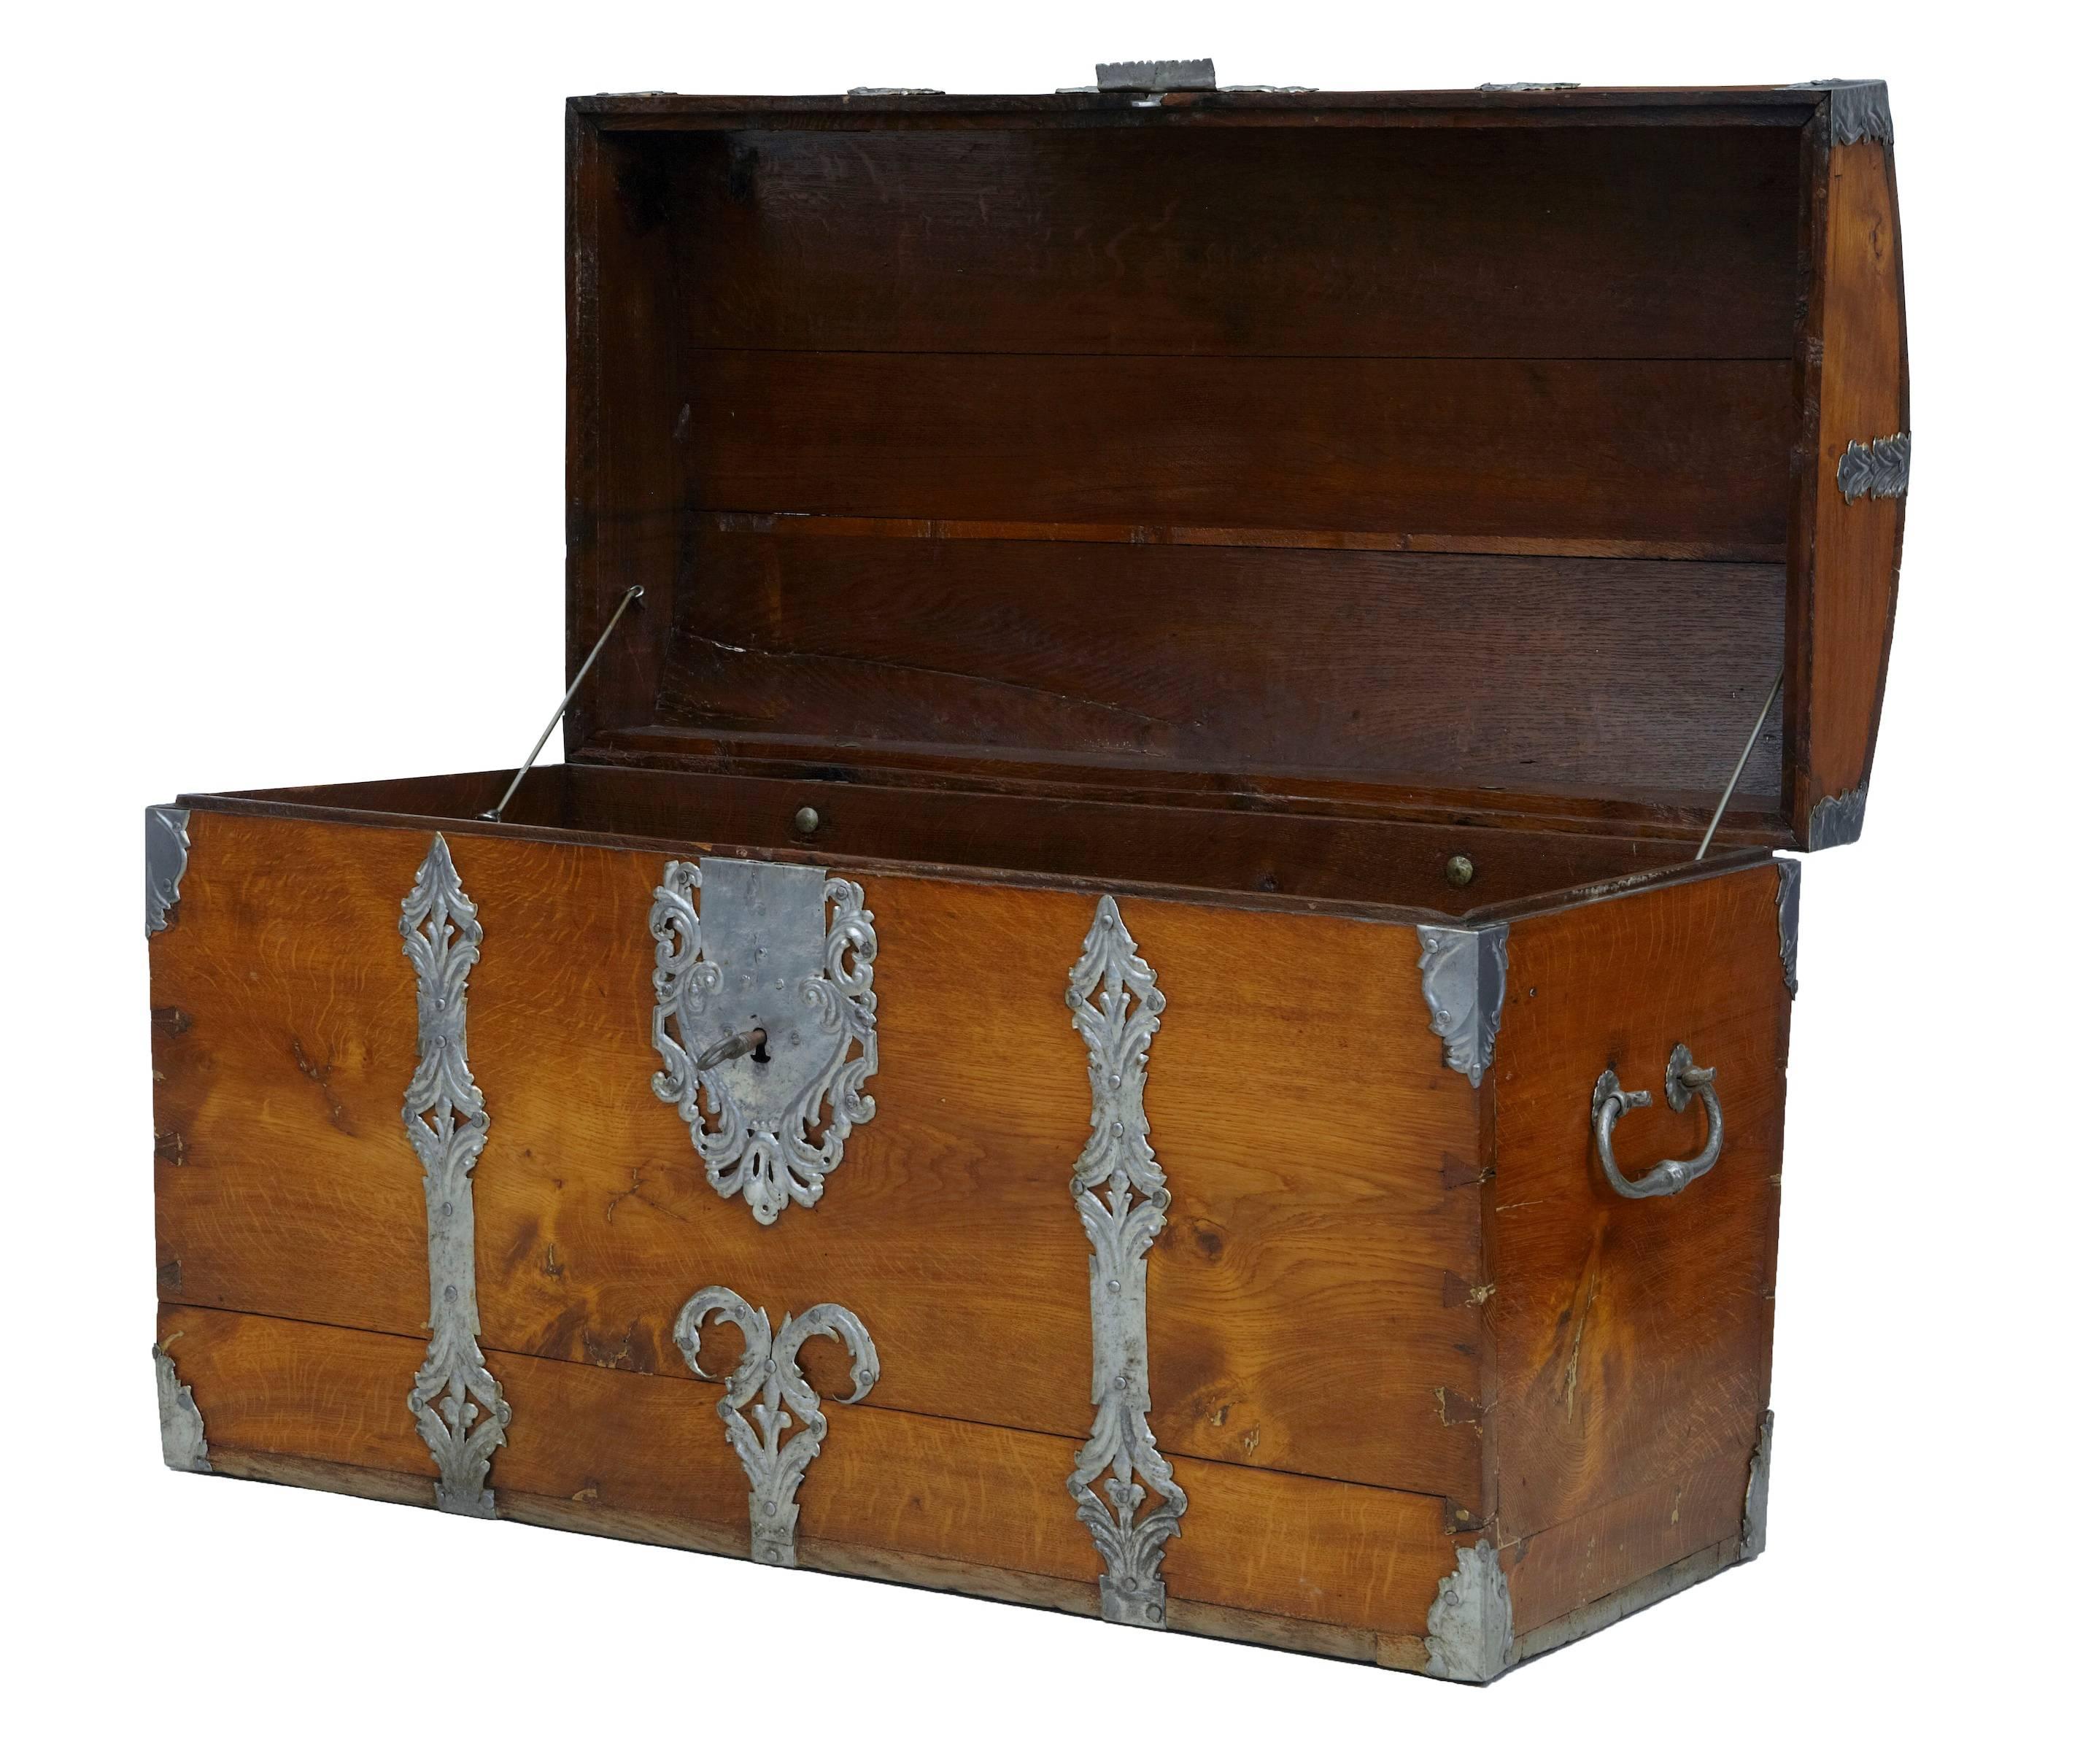 19th century domed top oak chest, circa 1860.
Decorated with steel swags.
Original lock and key and handles to the side.
Polished interior, top can be fixed open in place by later arms.

Some age splits to top.
Dimension:
Height: 29